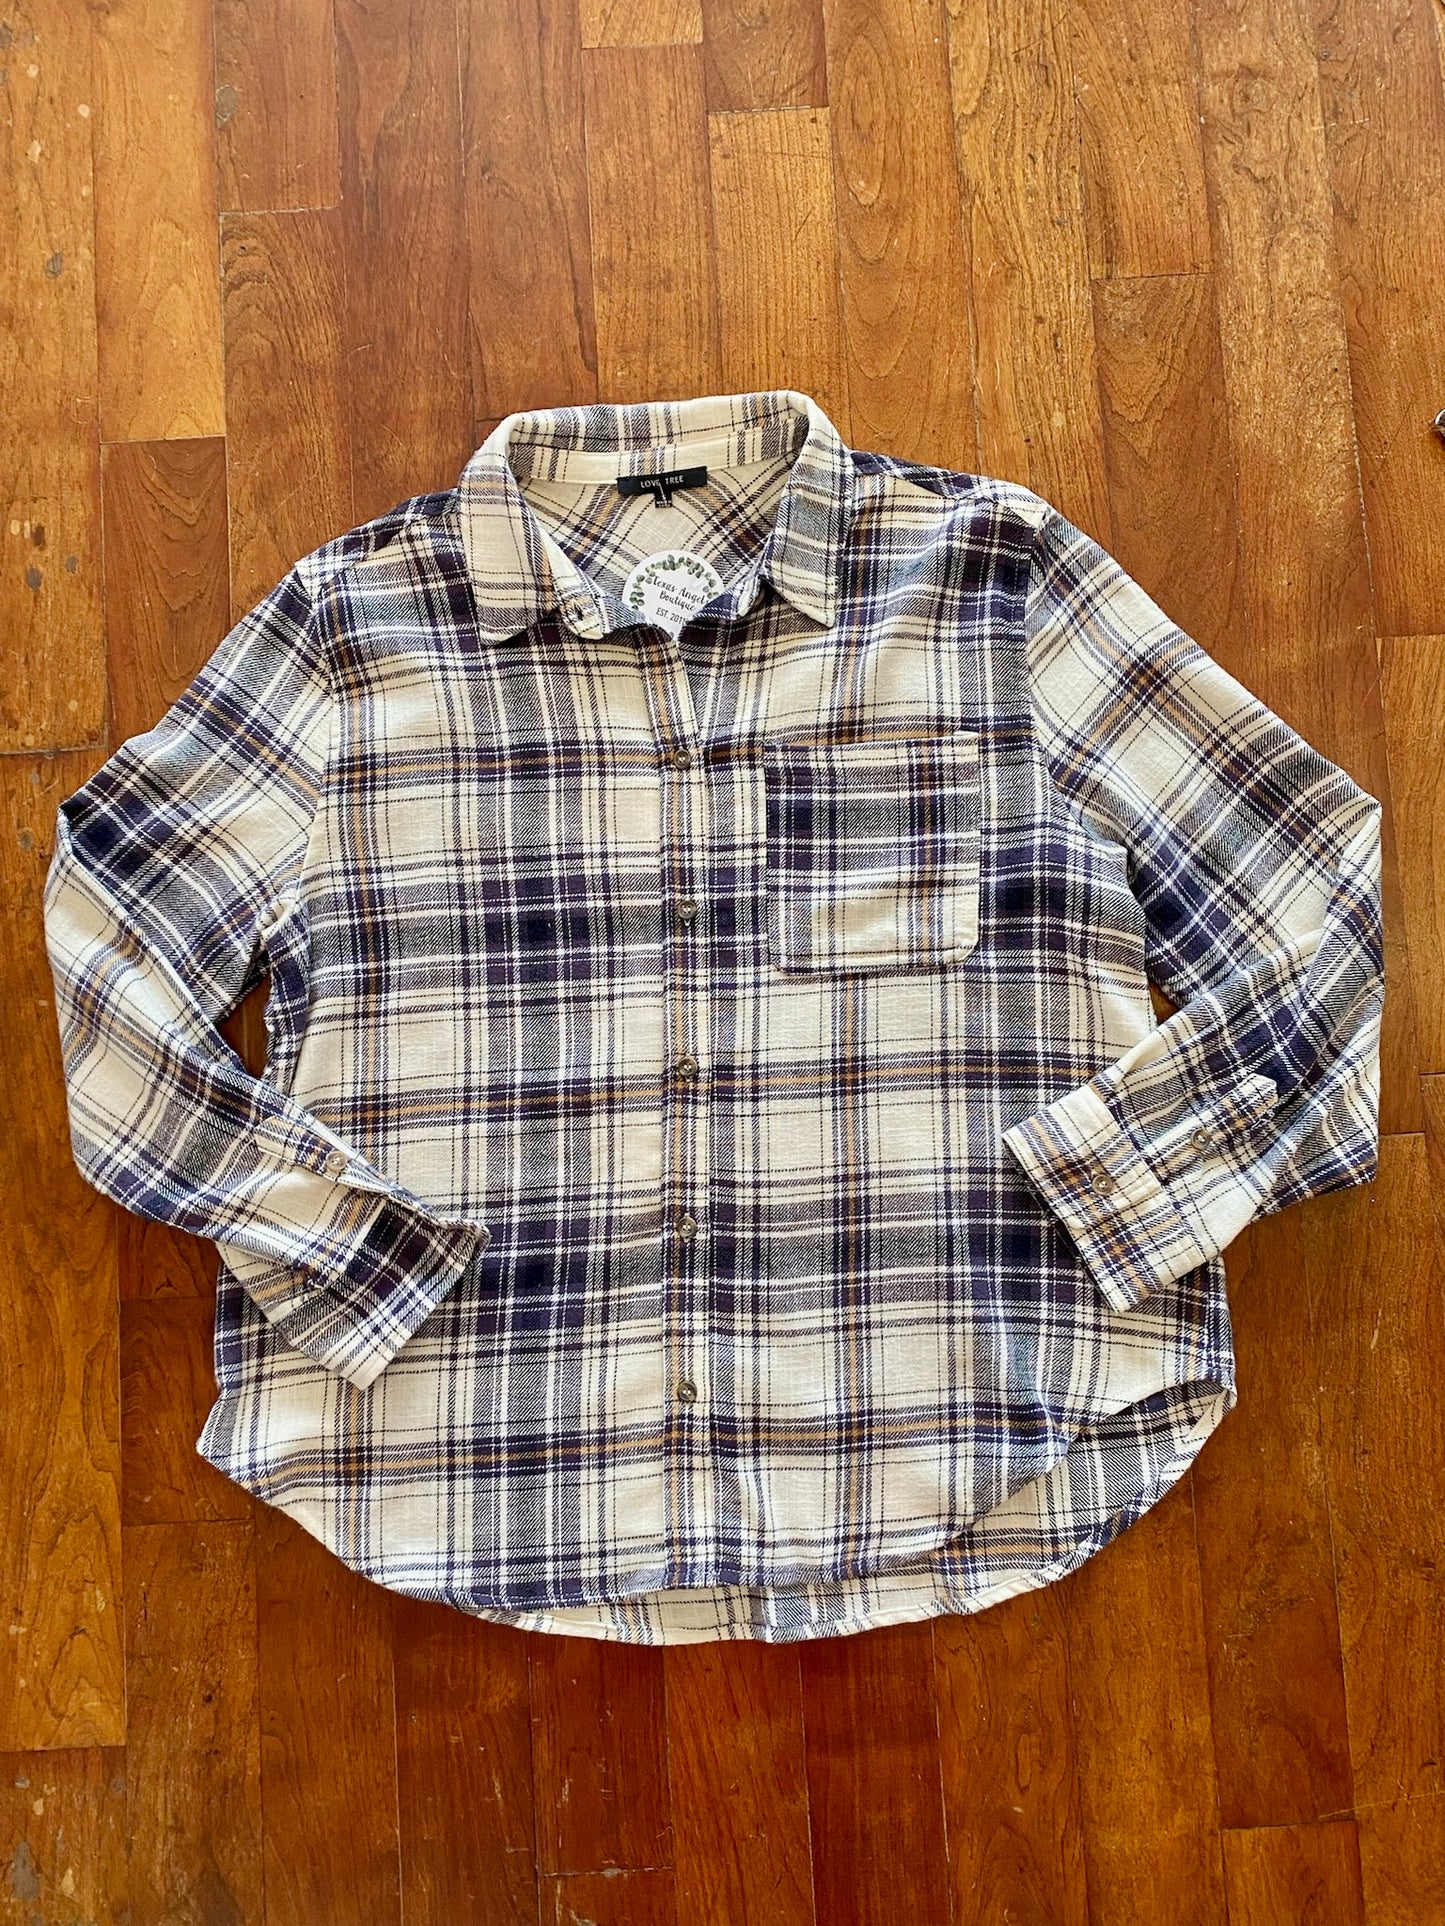 RESTOCK You'll Figure It Out Black Plaid Flannel